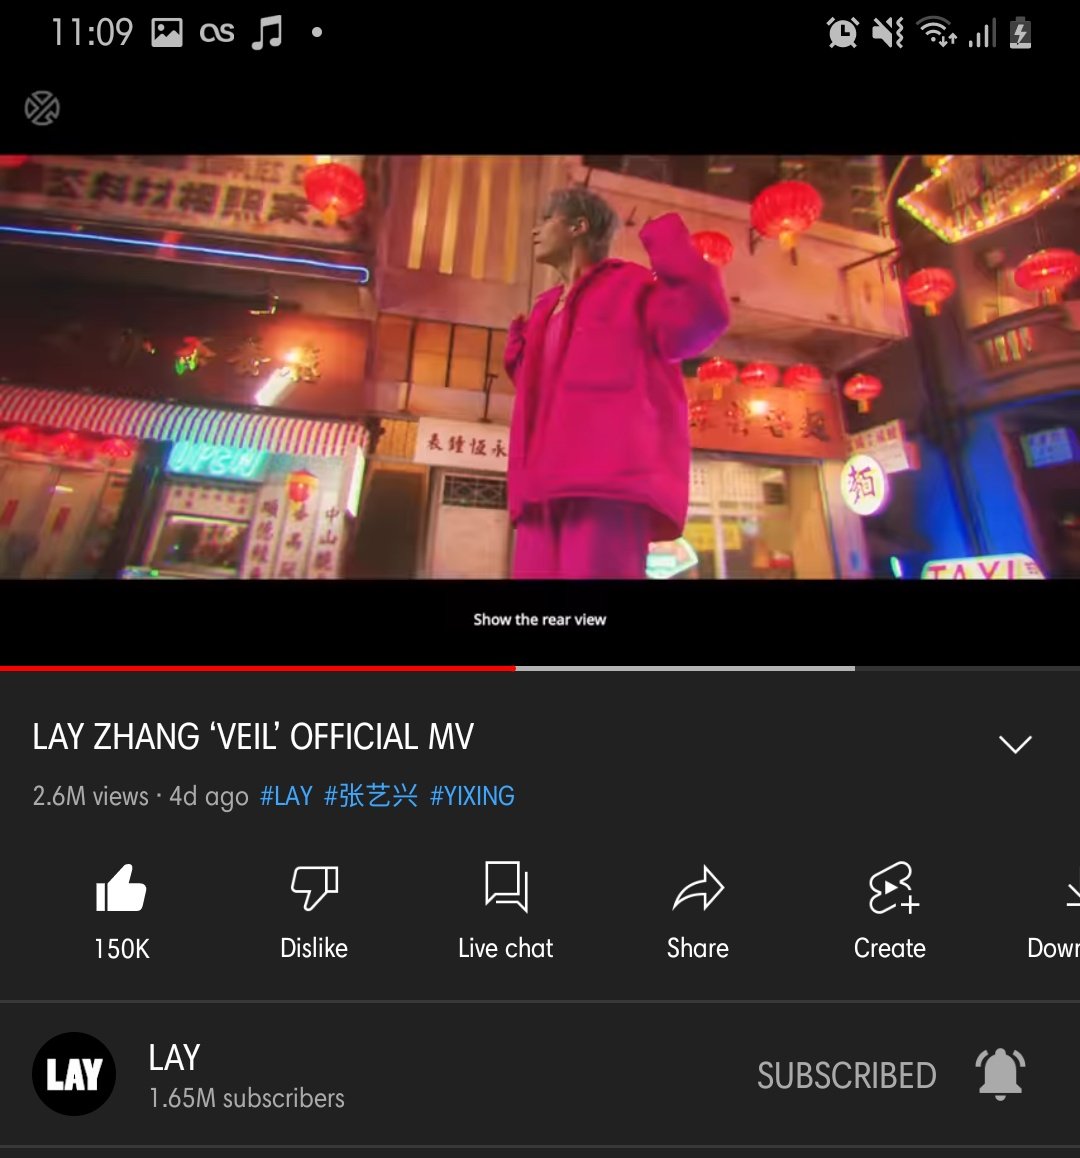 Let's stream West 💪
#LAYgoingWEST @layzhang